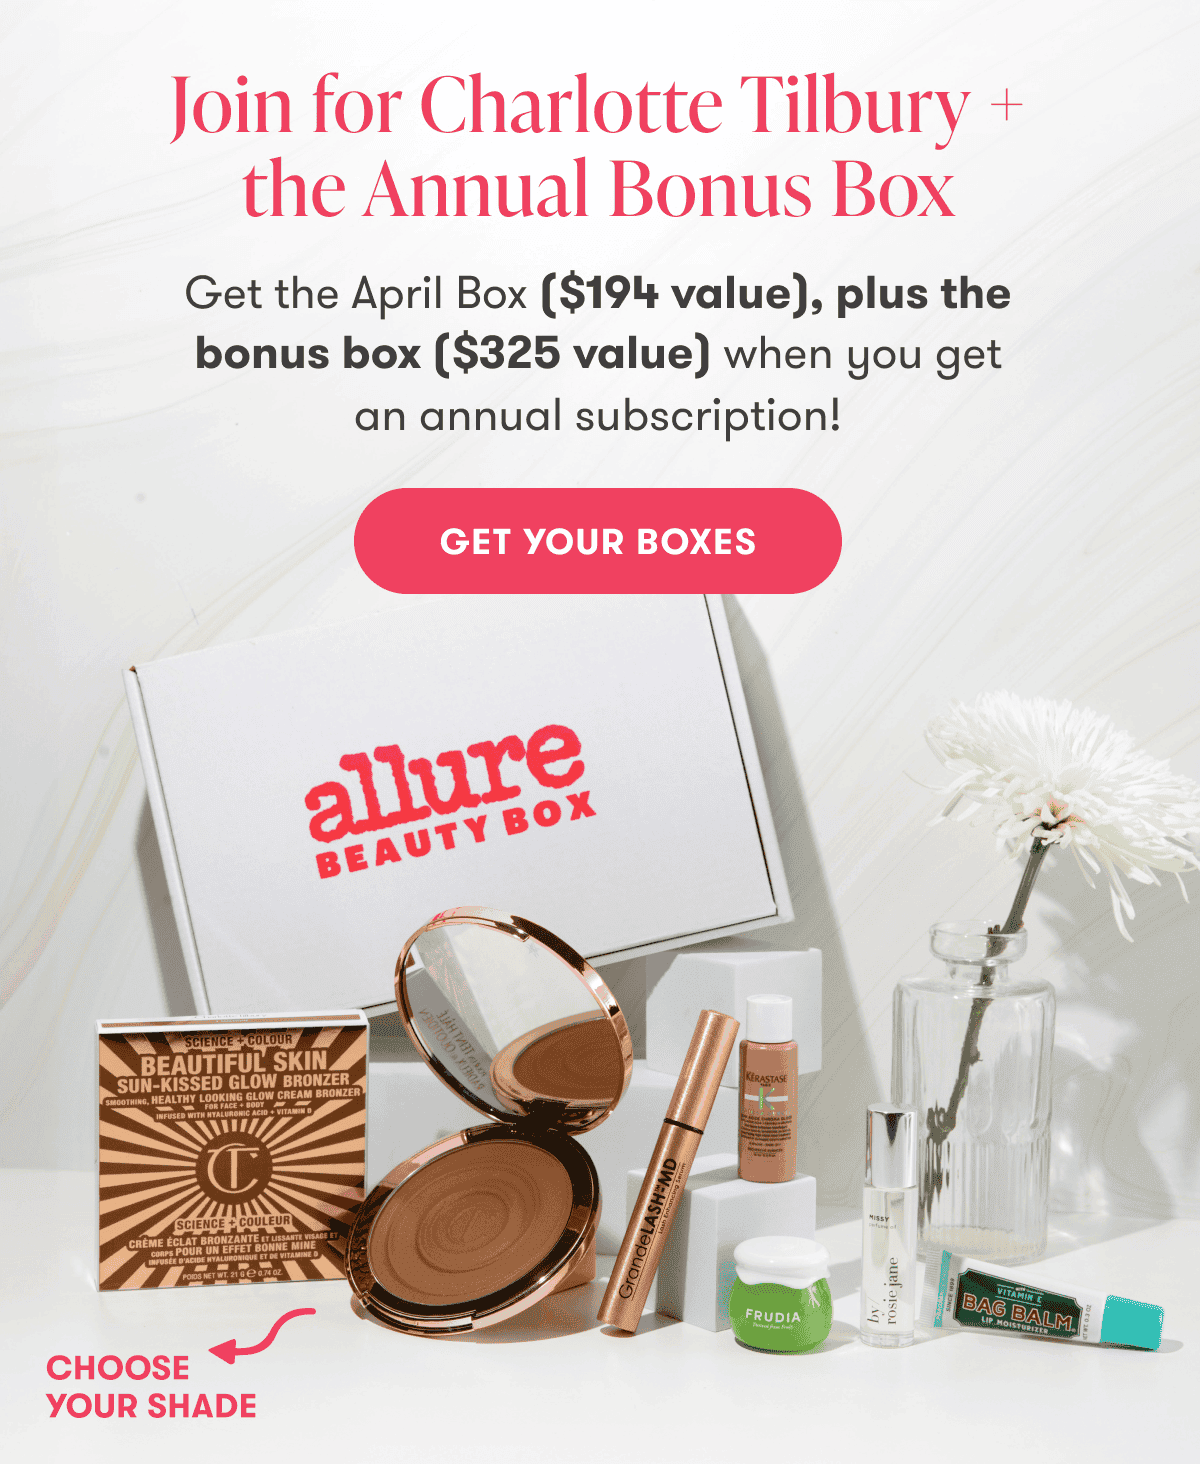 Join for Charlotte Tilbury +the Annual Bonus Box. Get the April Box (\\$194 value), plus the bonus box (\\$325 value) when you get an annual subscription! Get your boxes.